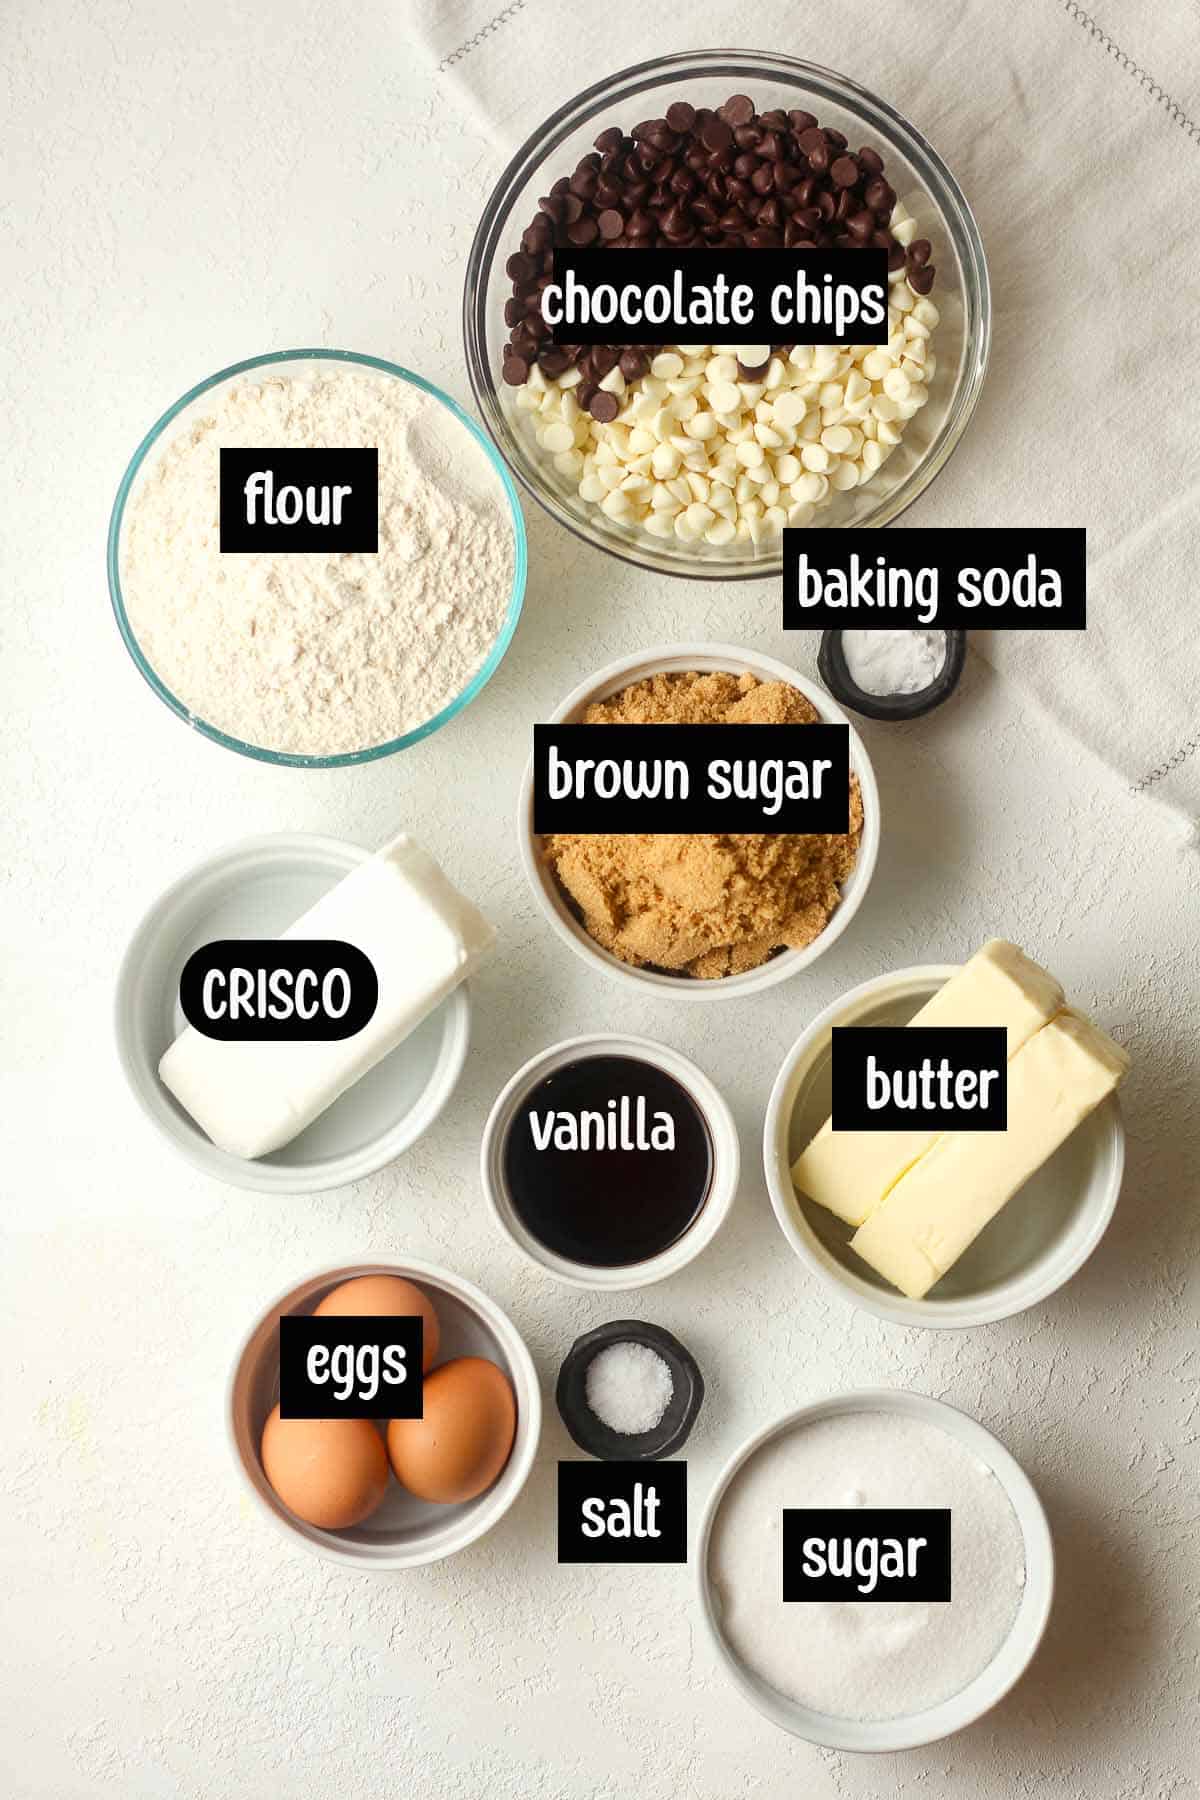 The ingredients for the chocolate chip cookies with Crisco.